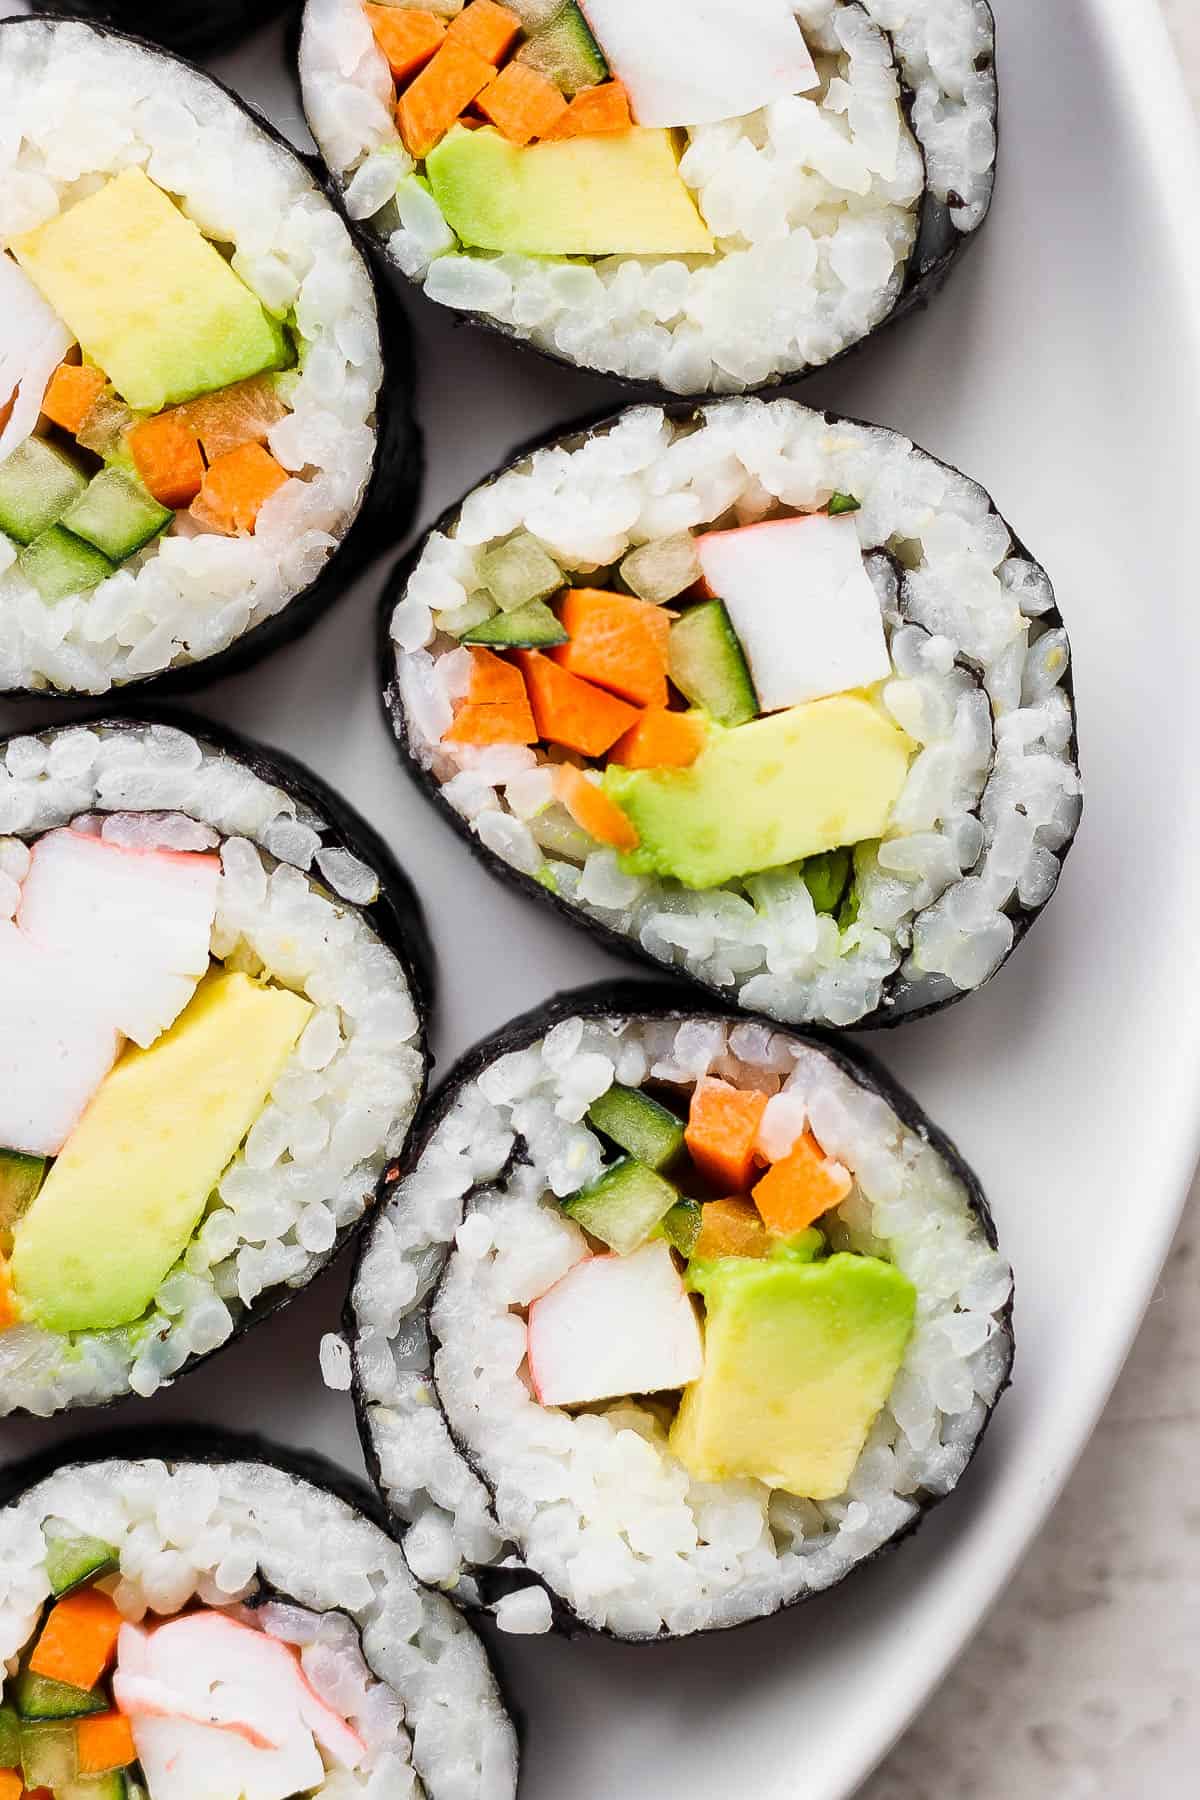 Pieces of a California roll on a white plate.